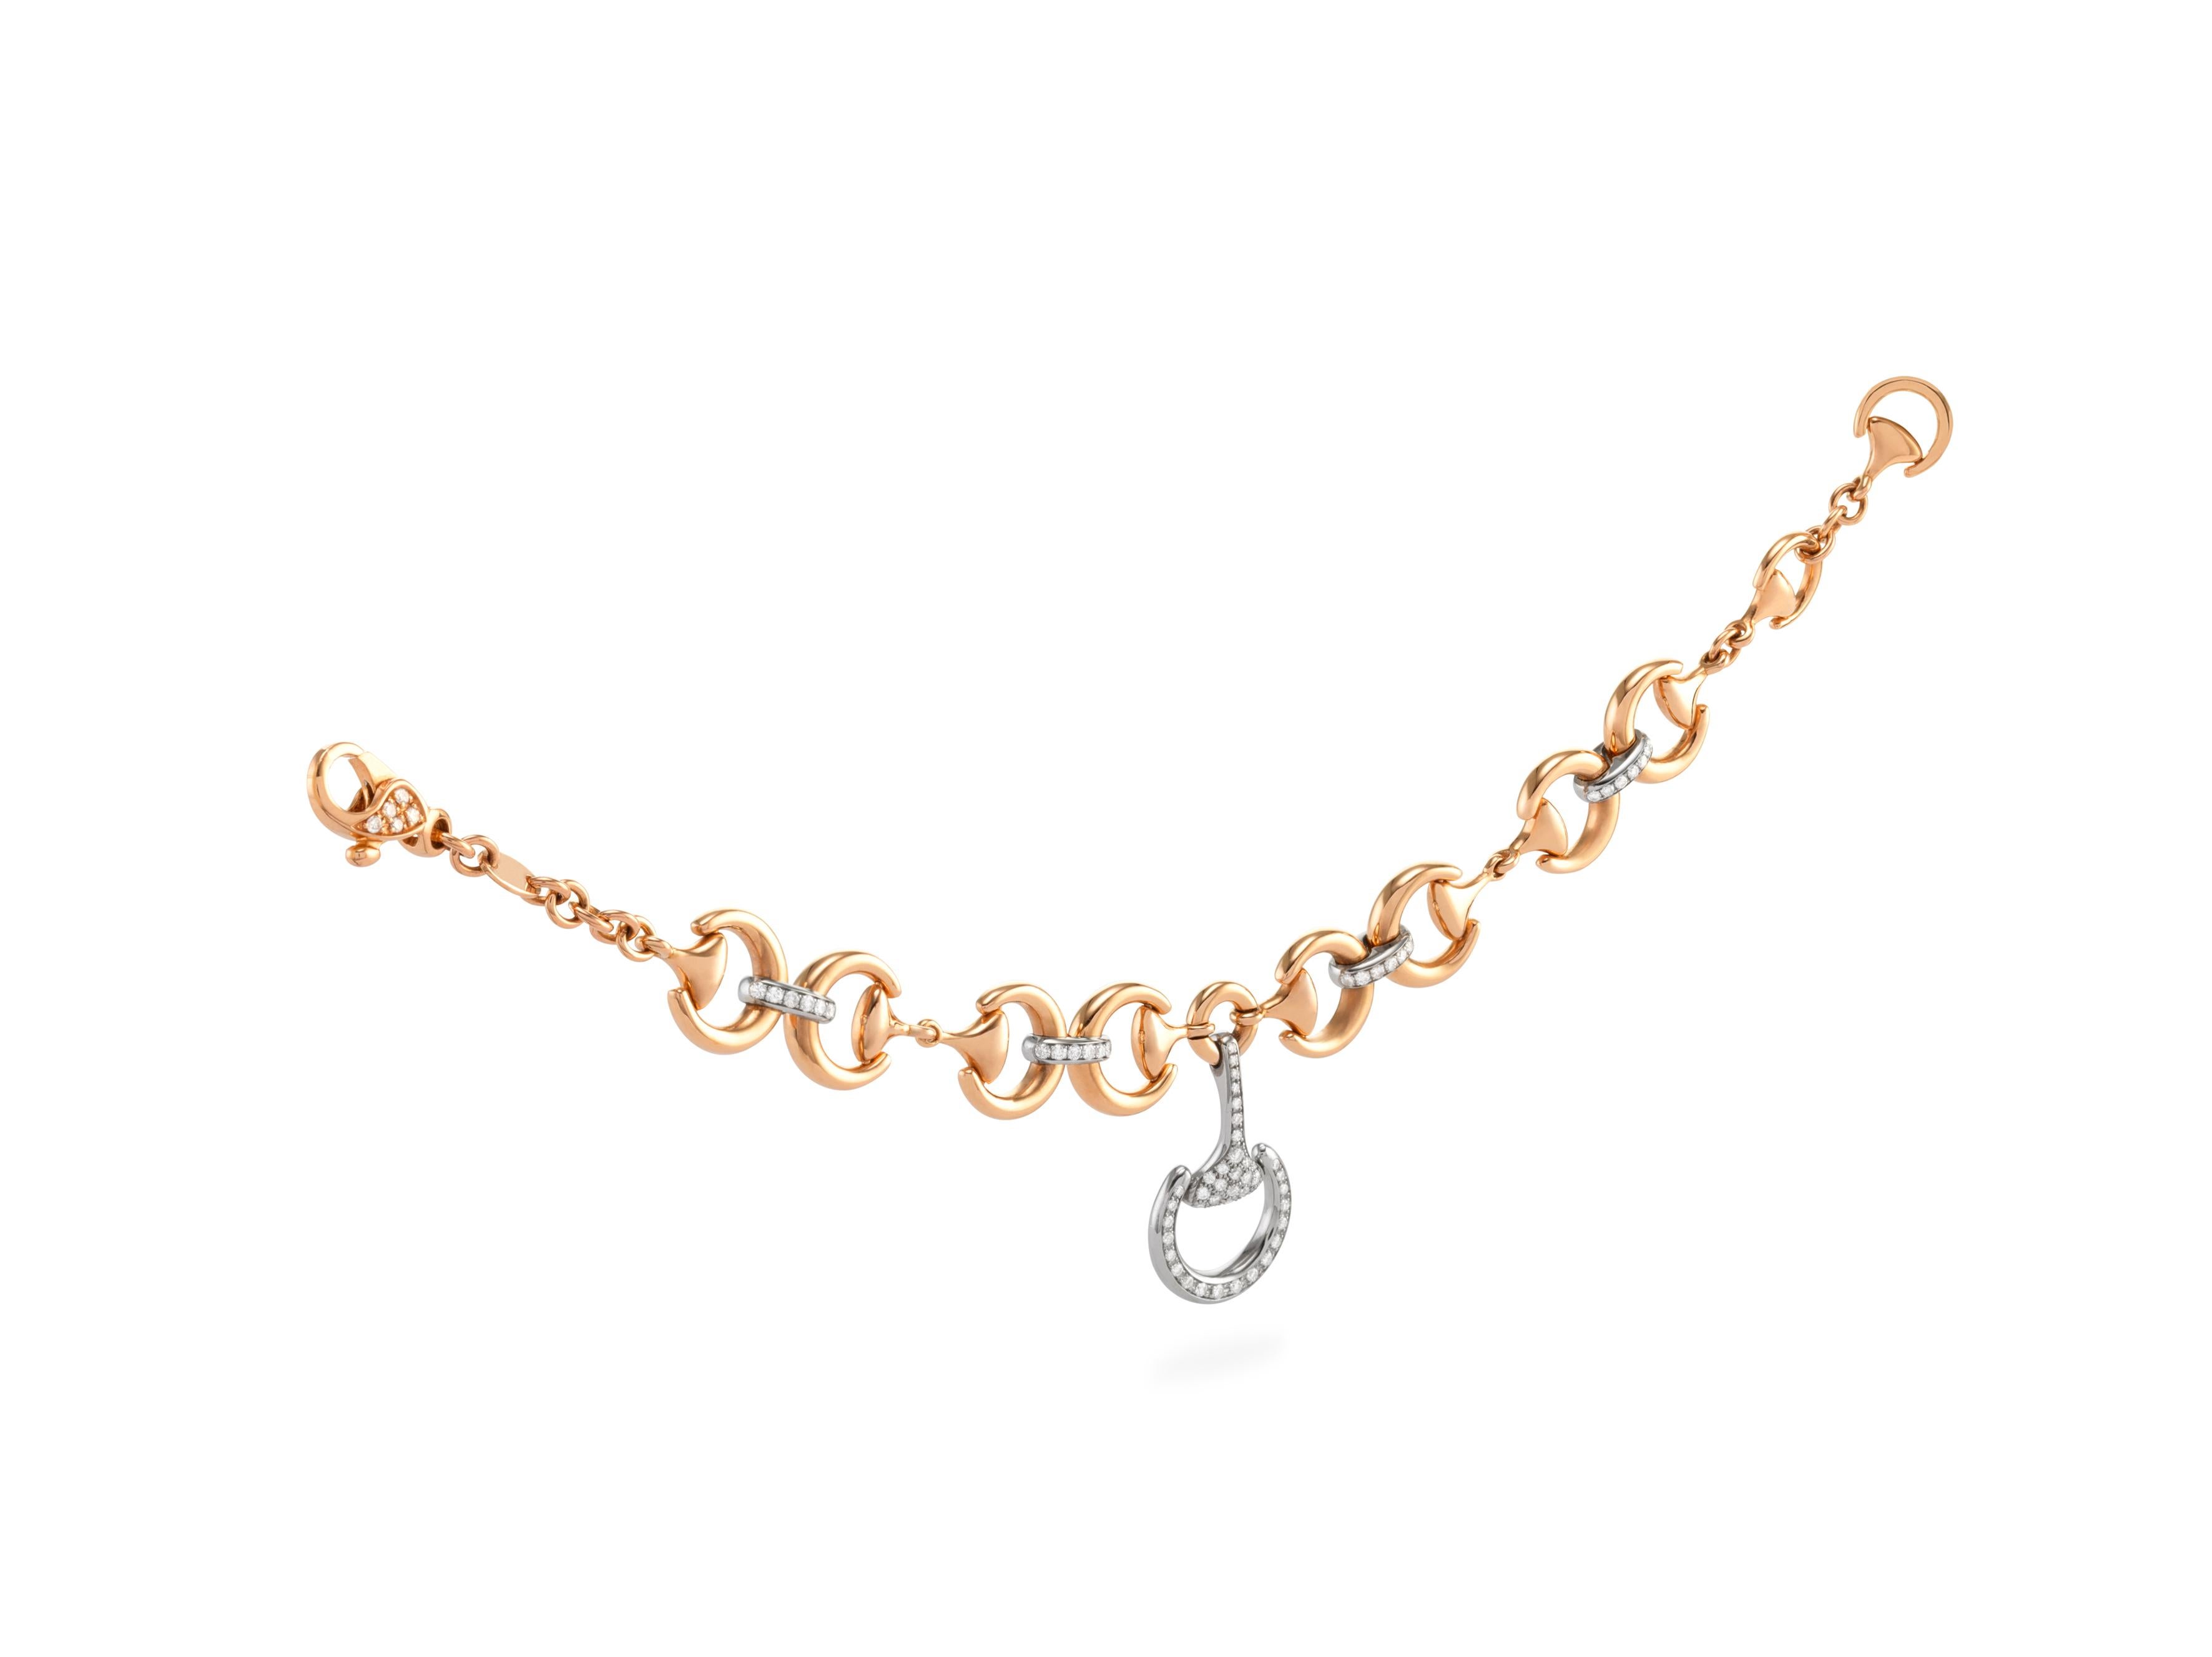 here we propose an Handmade in Italy,  Ubaldi Gioielli,  Horse bit  bracelet in white and rose gold 18k 
Horse-bit detail chain in rose gold 18k
Diamonds pave, and onto the latch an additional pavè of diamonds is present G color and VVs clarity, for